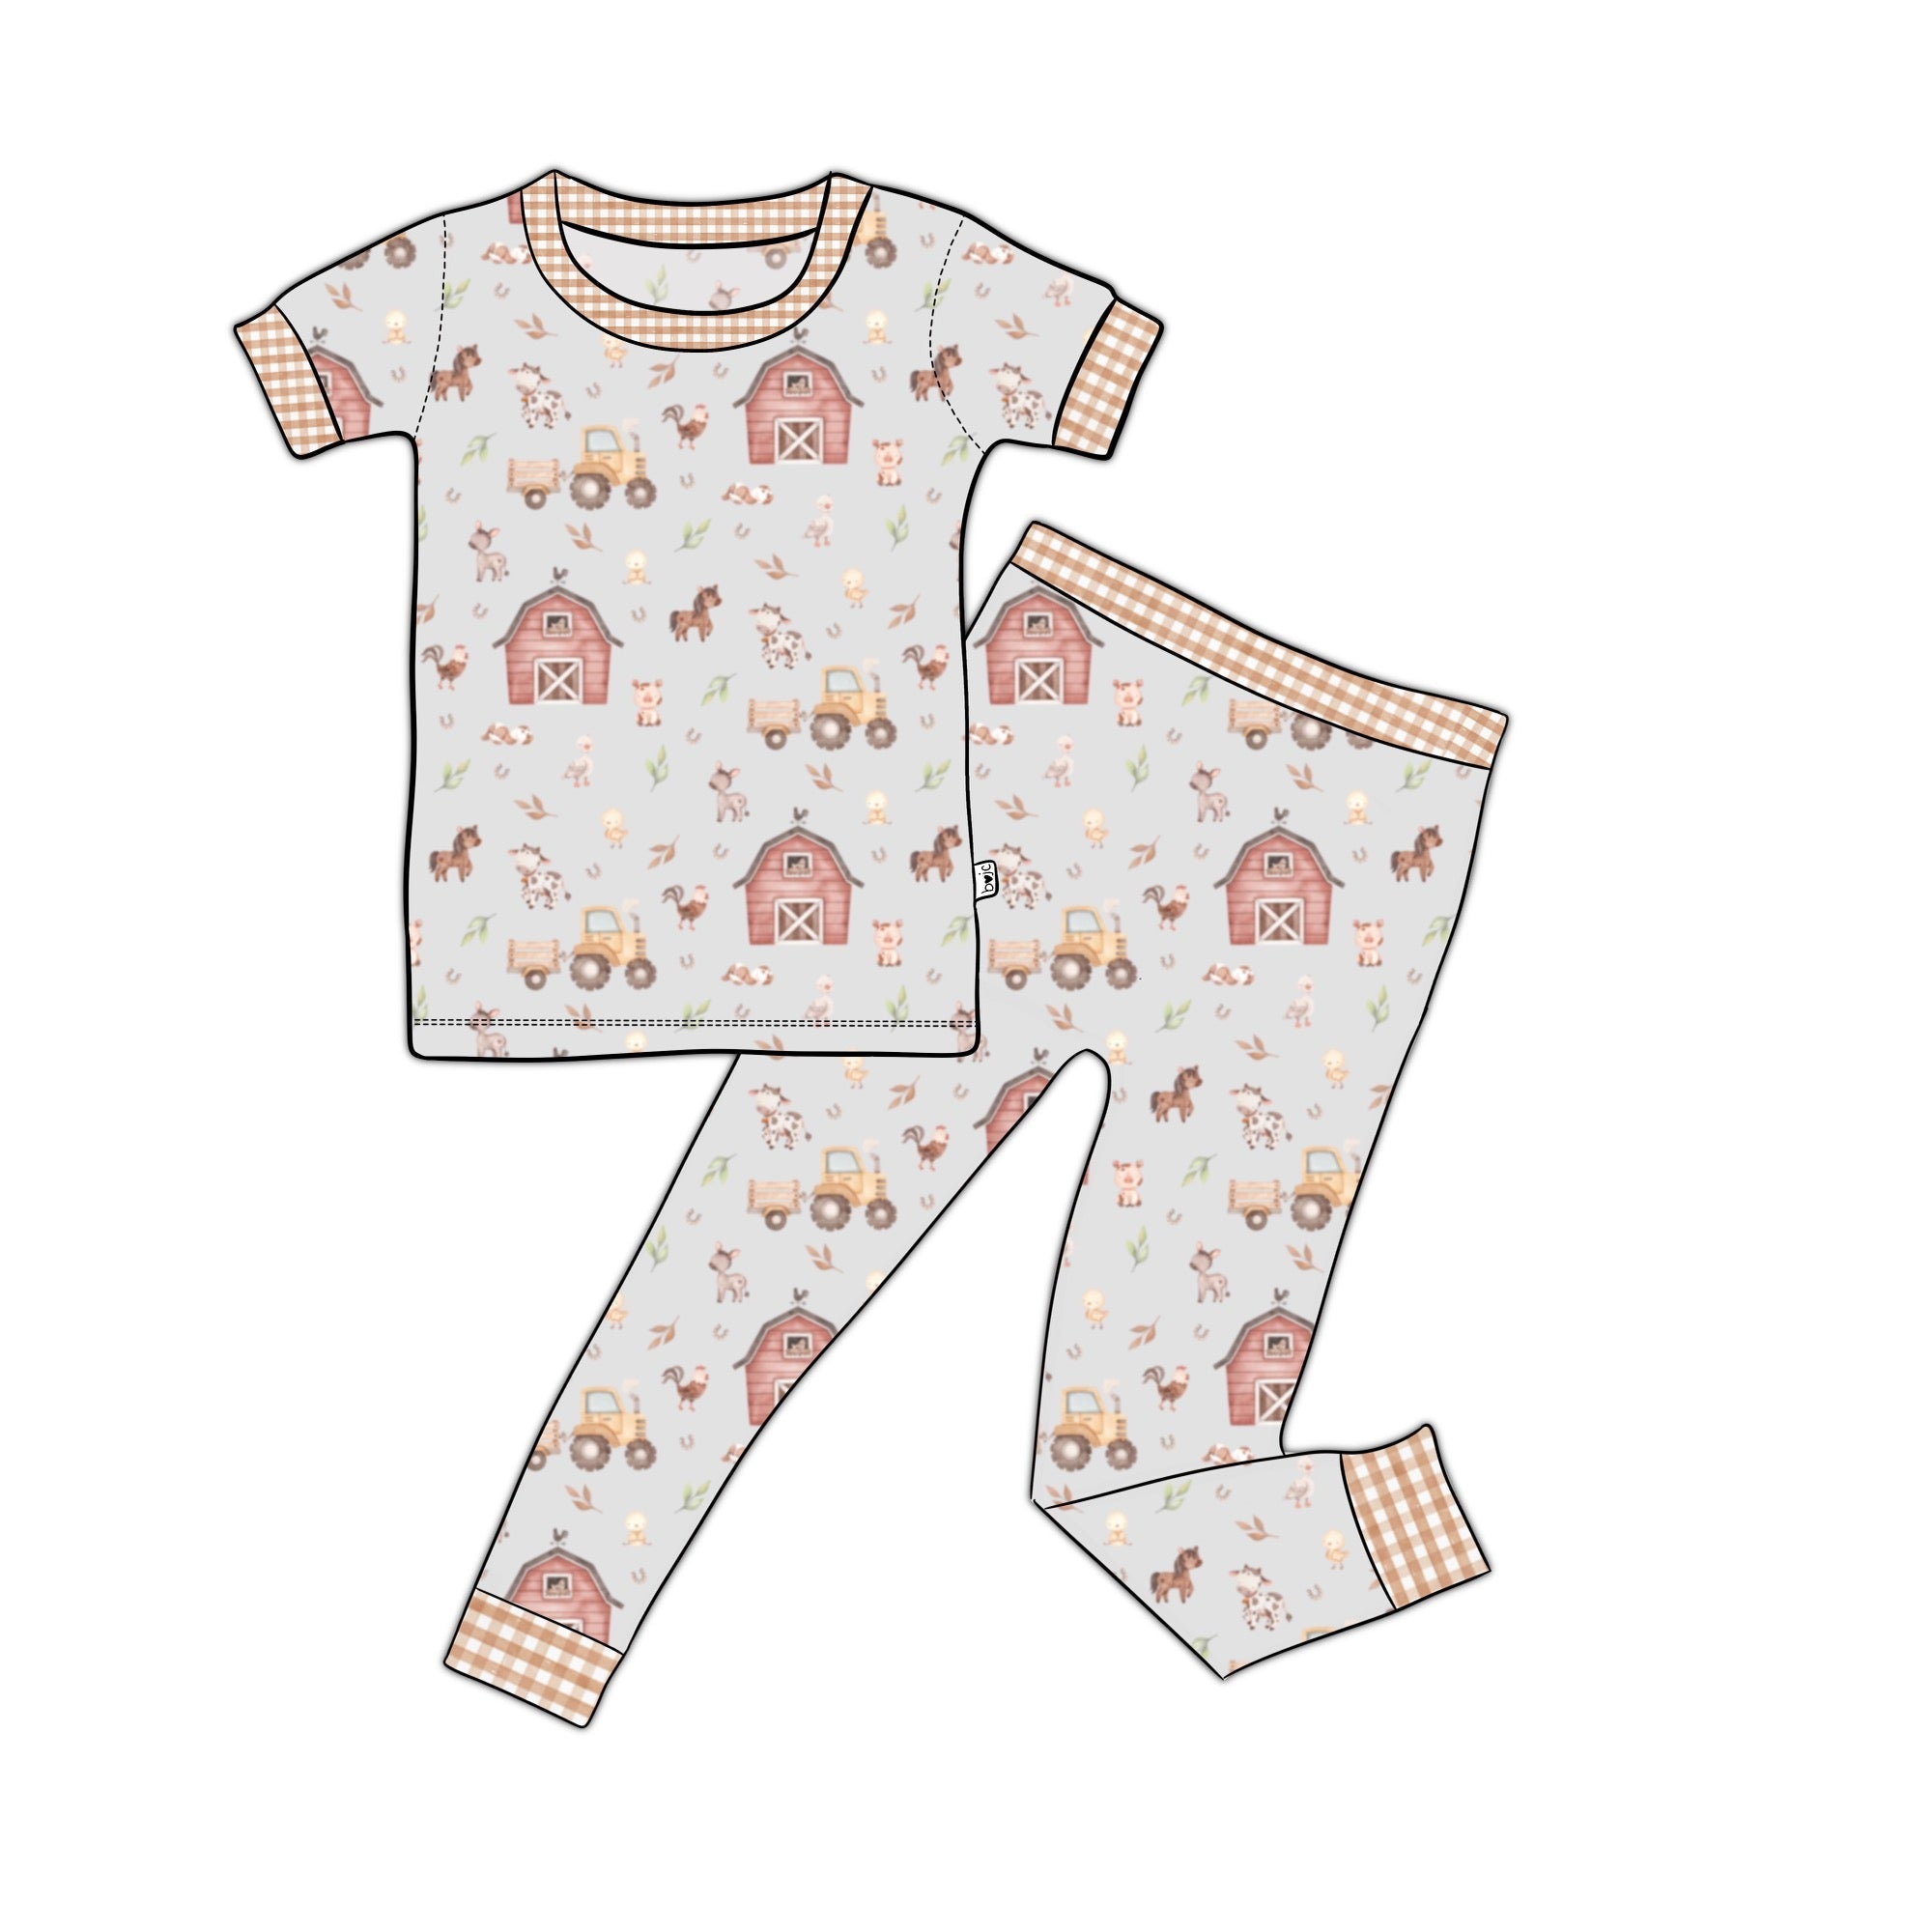 bamboo B-O-J-C Oh! short sleeve two piece set